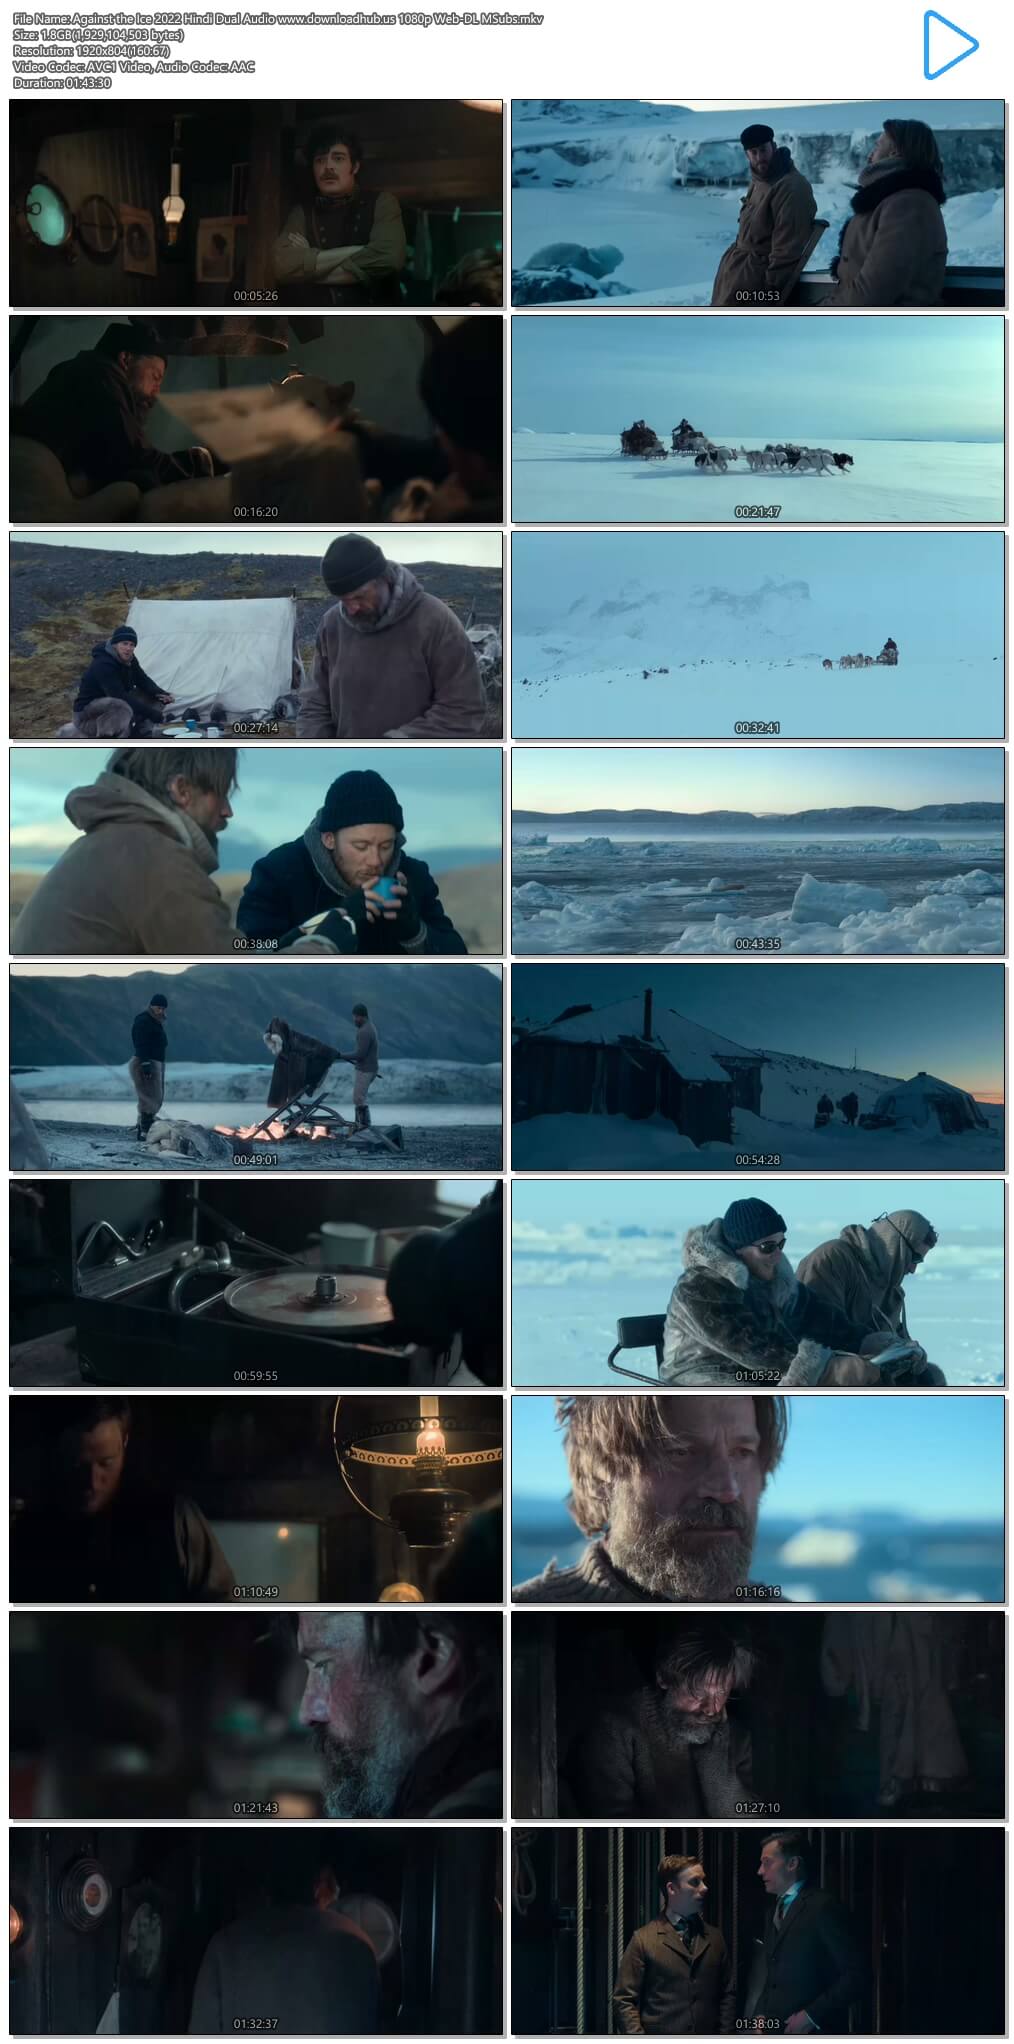 Against the Ice 2022 Hindi Dual Audio 1080p 720p 480p Web-DL MSubs HEVC